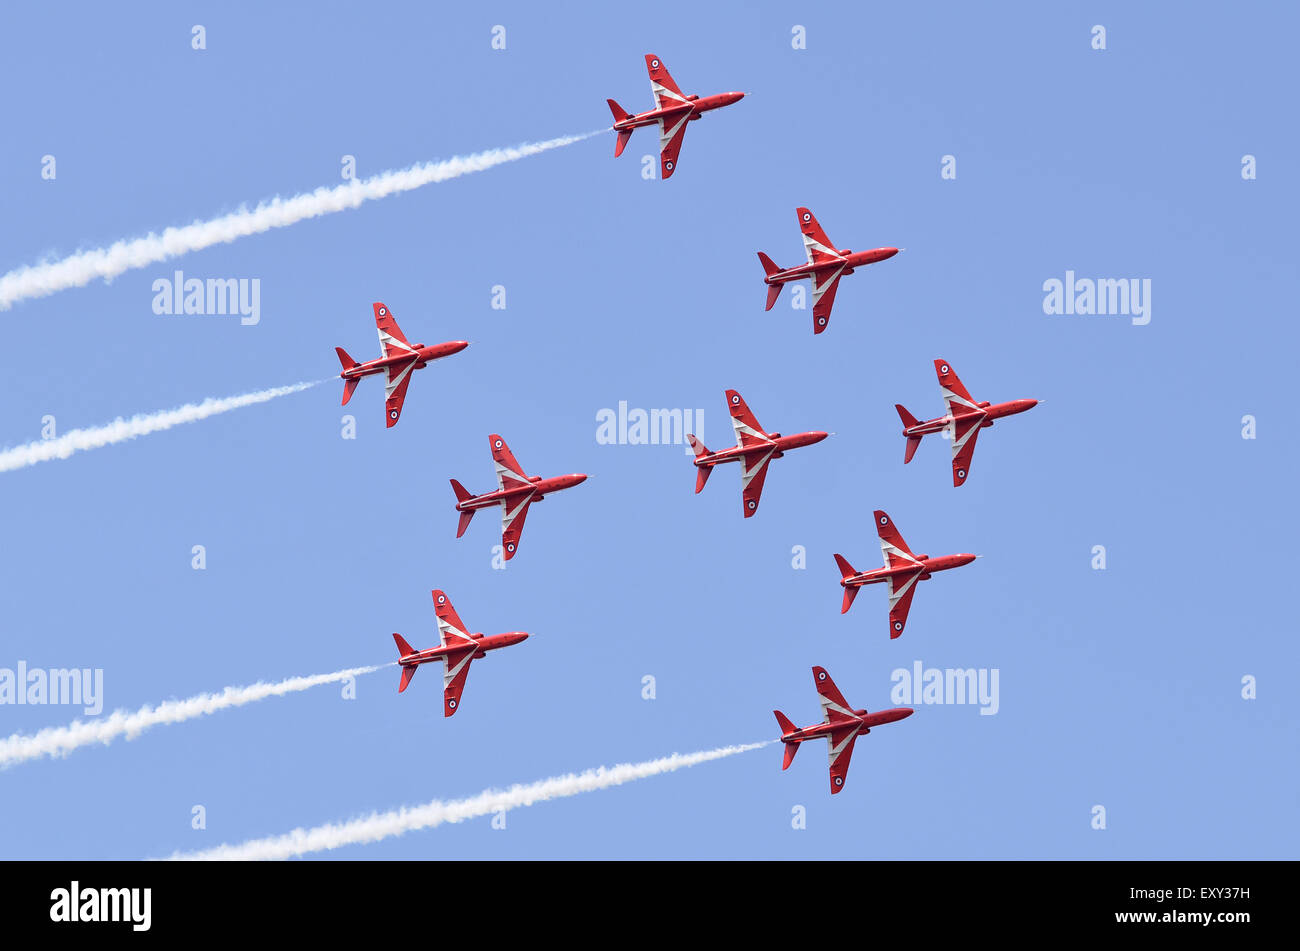 Red Arrows RAF BAe Hawk aircraft display at RIAT 2015, Fairford, UK. Credit:  Antony Nettle/Alamy Live News Stock Photo